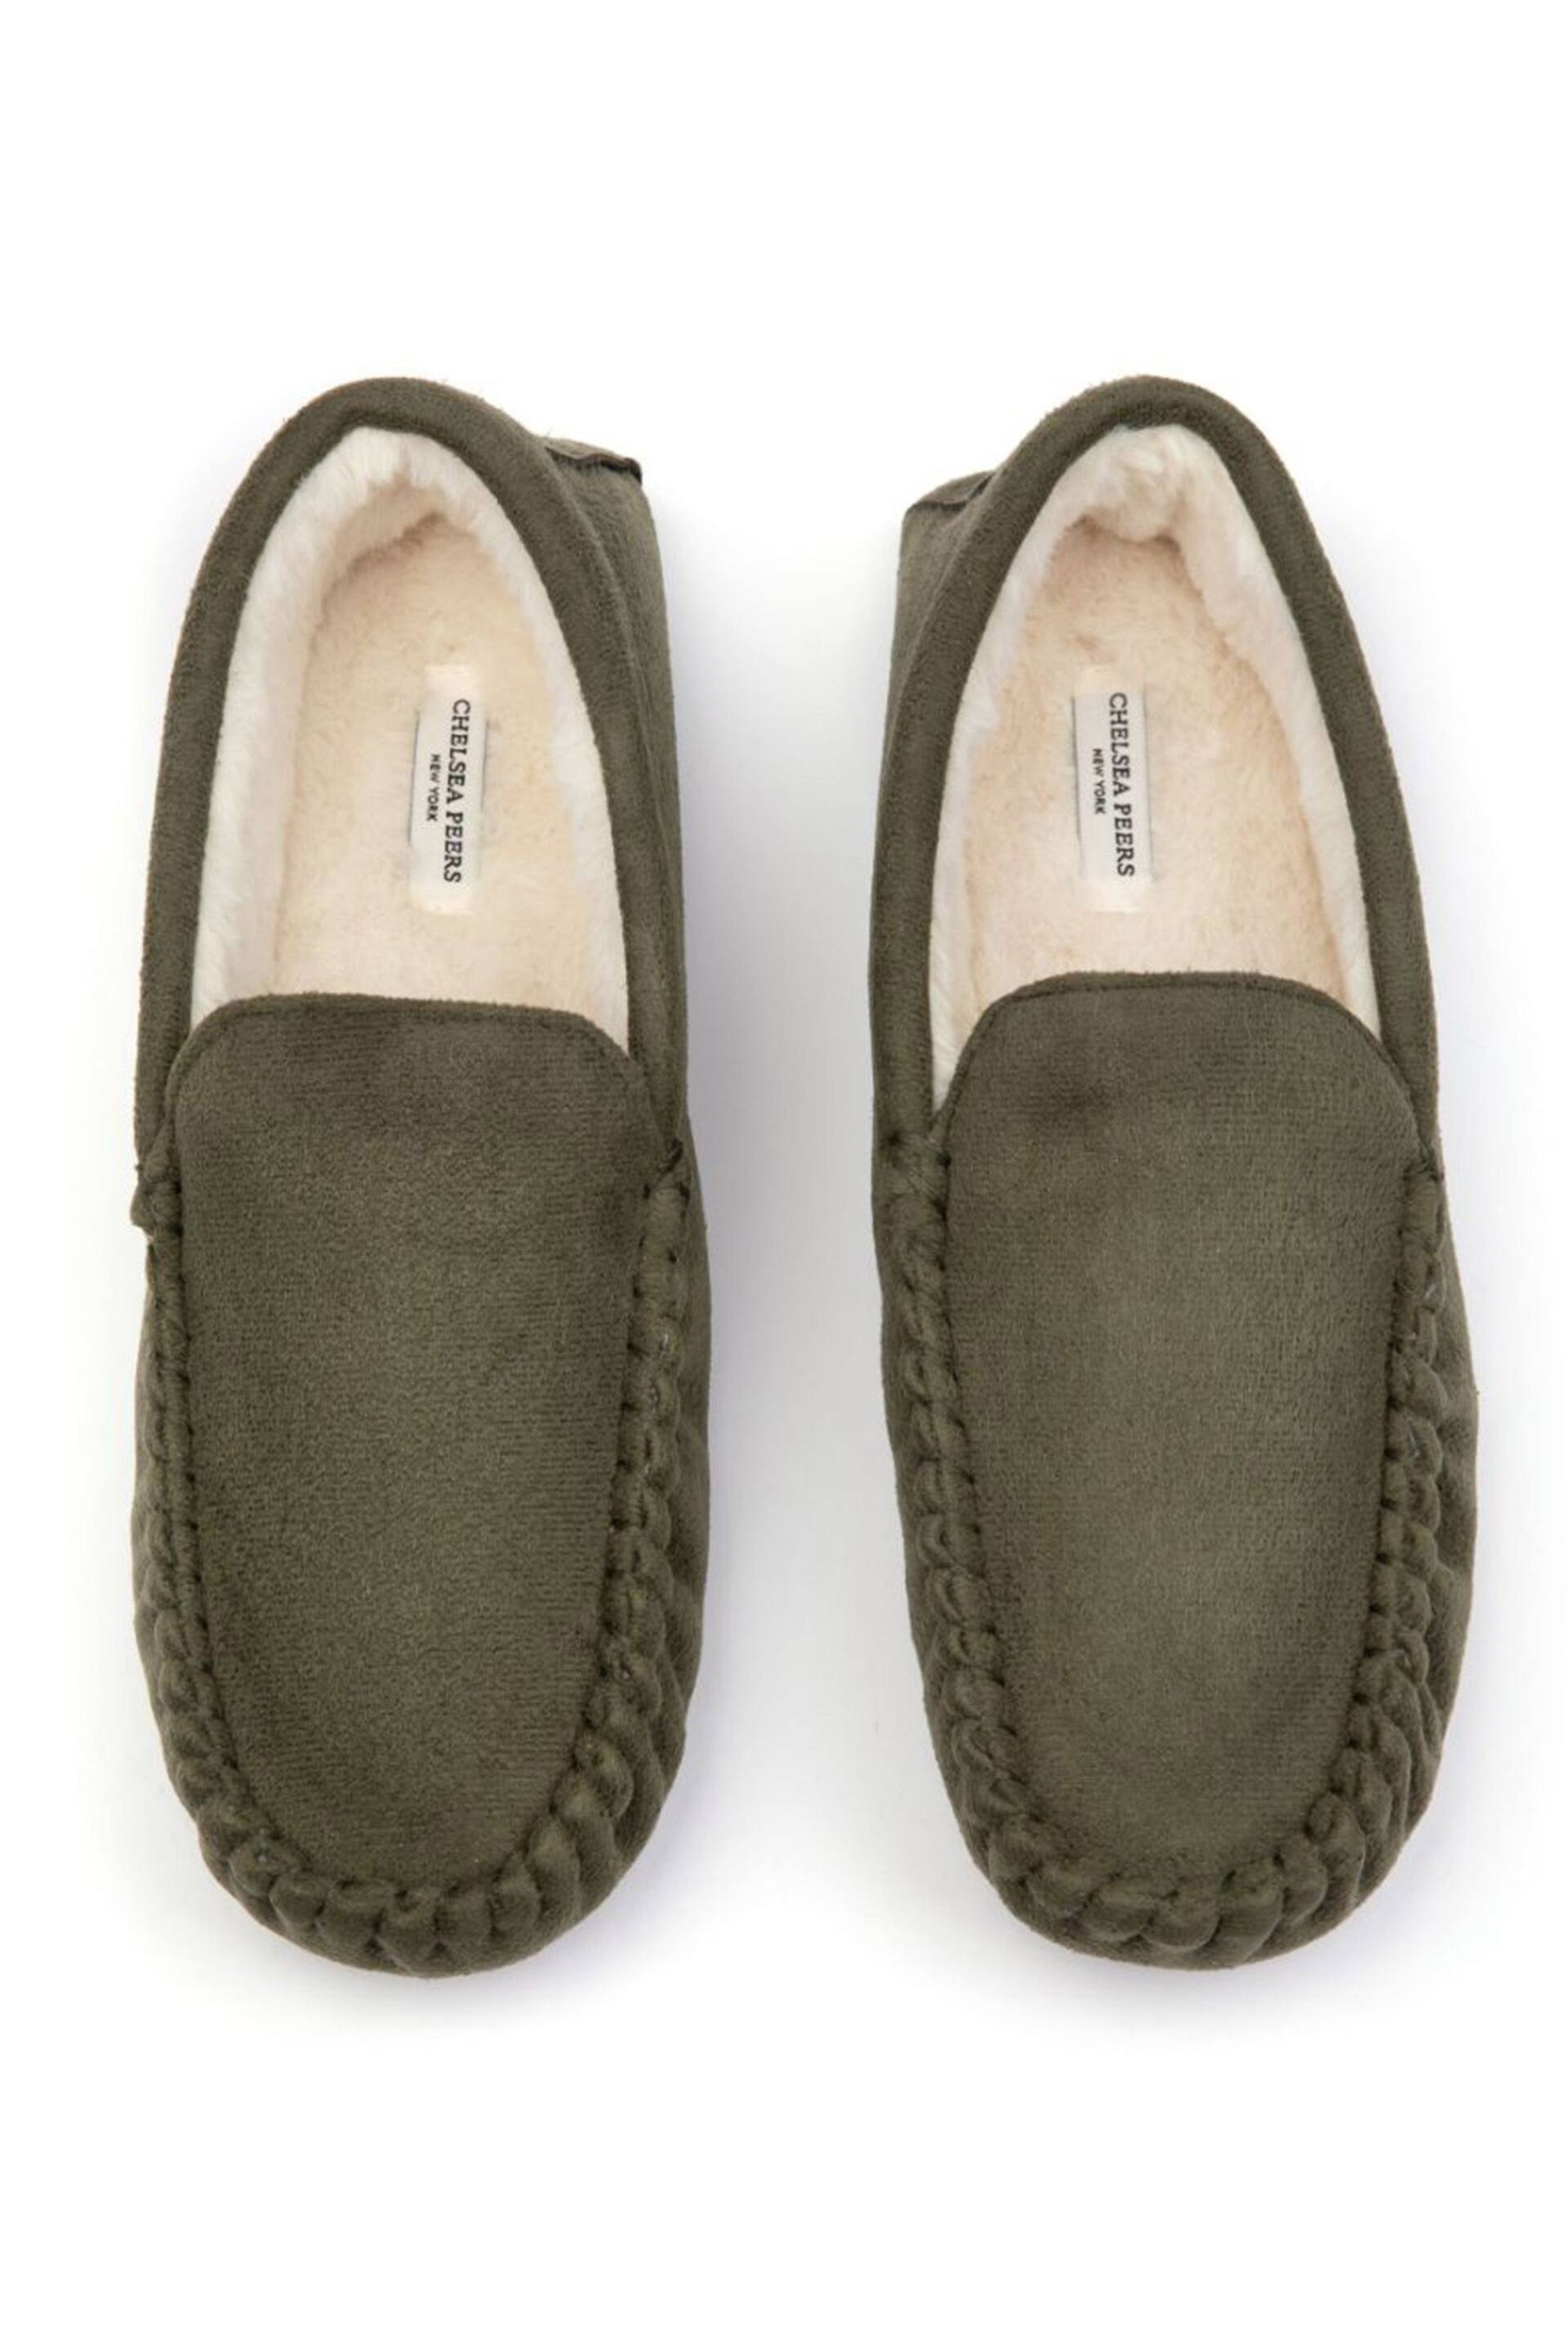 Chelsea Peers Green Suedette Moccasin Slippers - Men's - Image 1 of 4